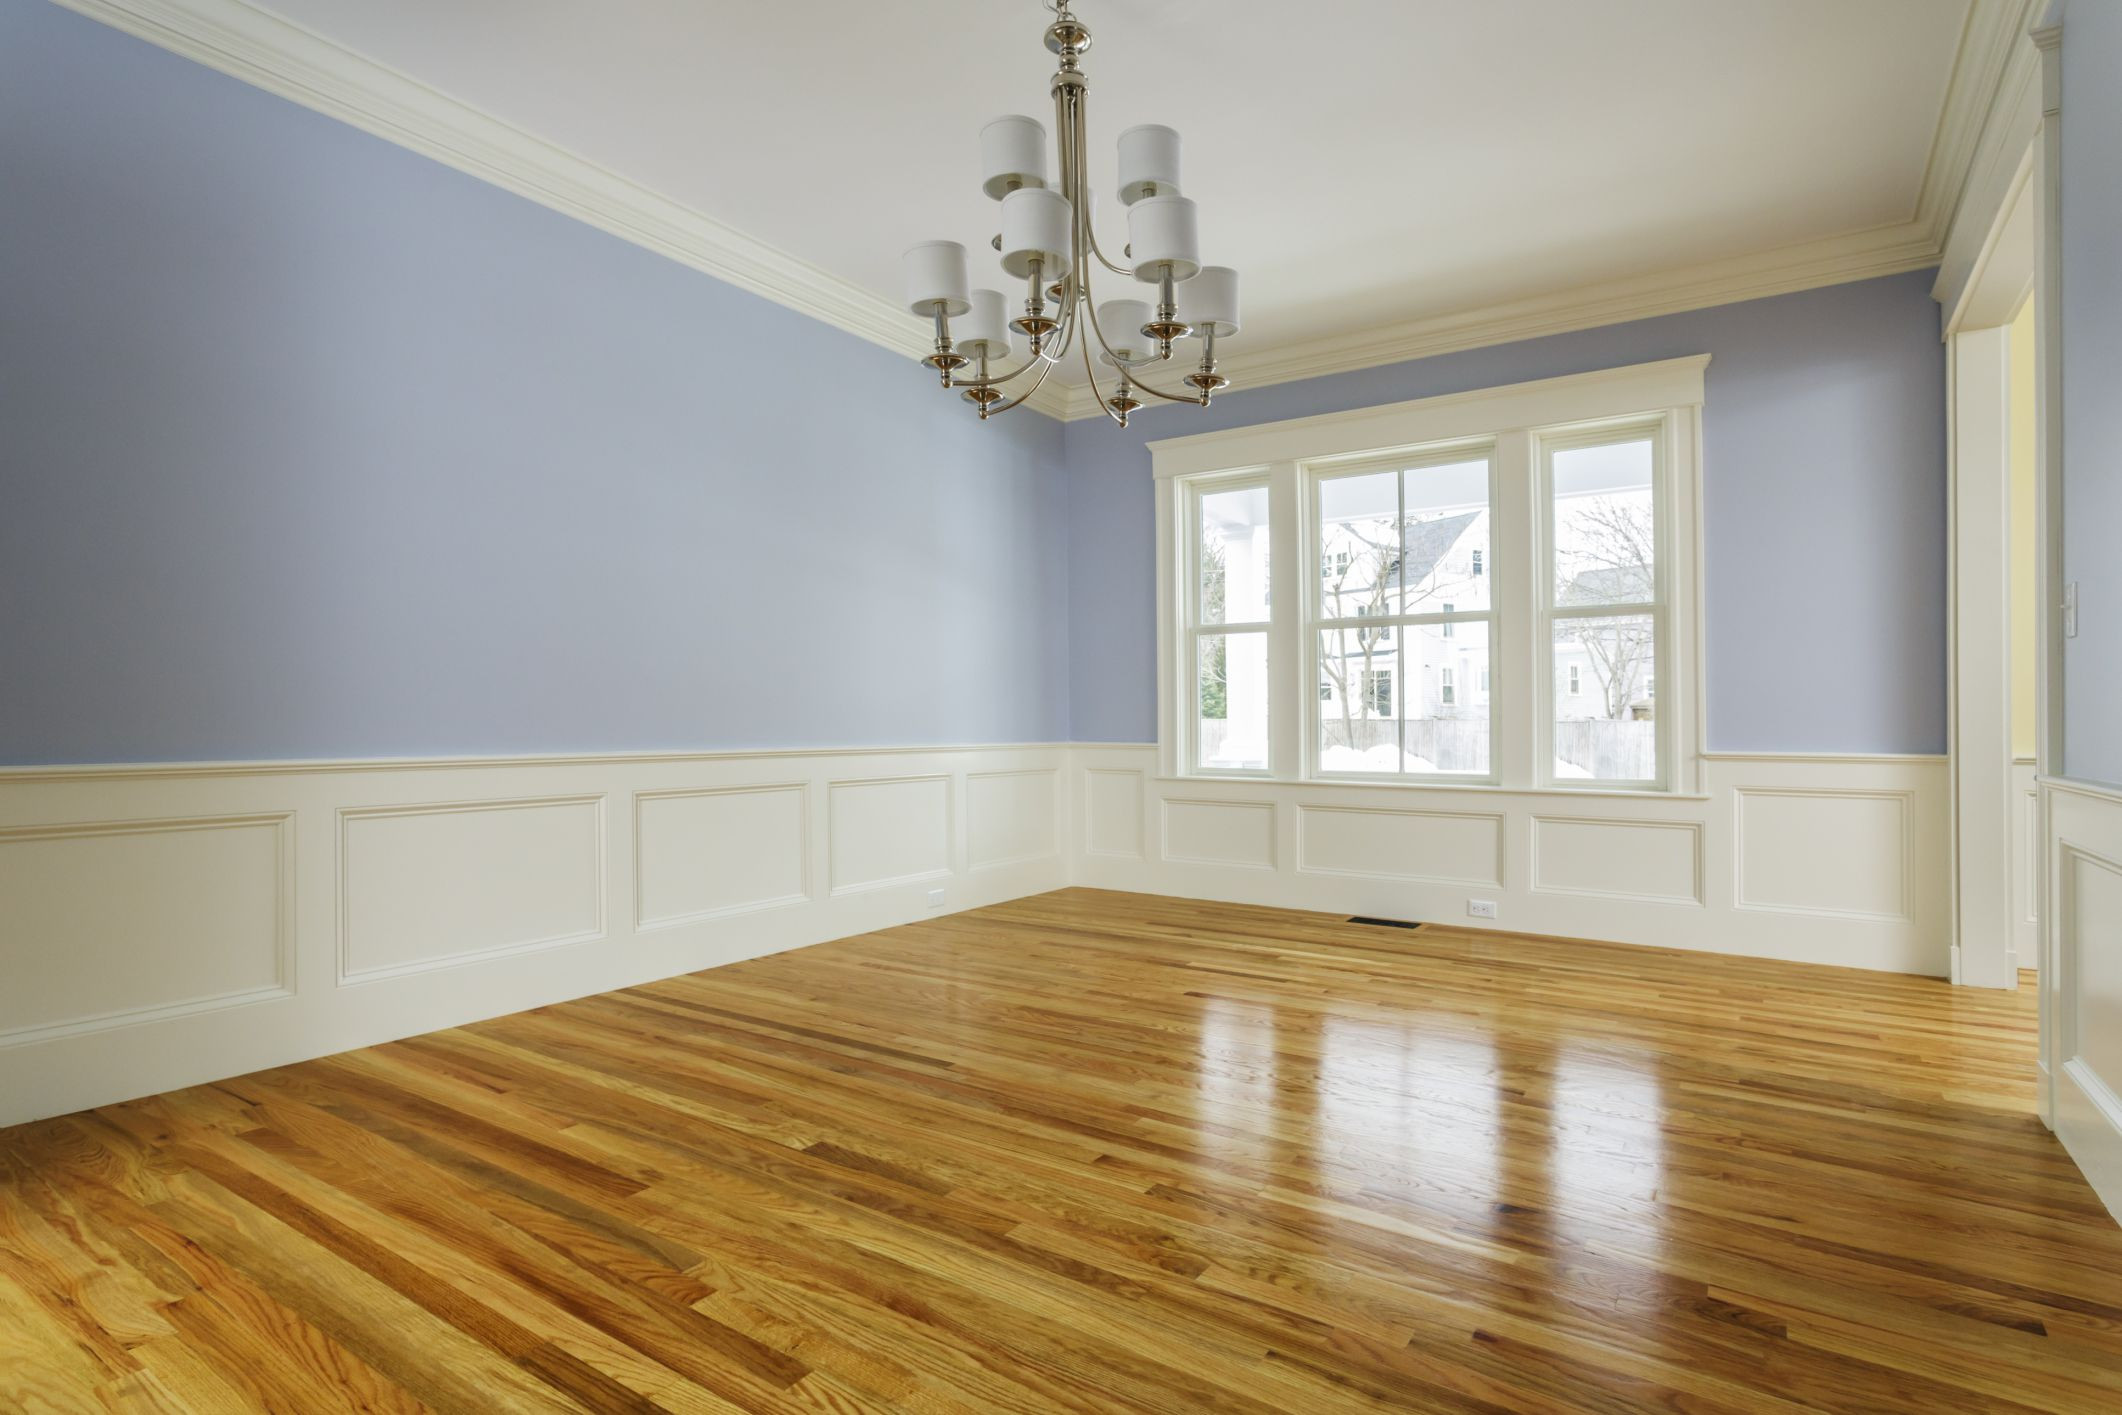 10 Trendy How Do You Care for Engineered Hardwood Floors 2024 free download how do you care for engineered hardwood floors of how to make hardwood floors shiny in 168686572 56a4e87c3df78cf7728544a2